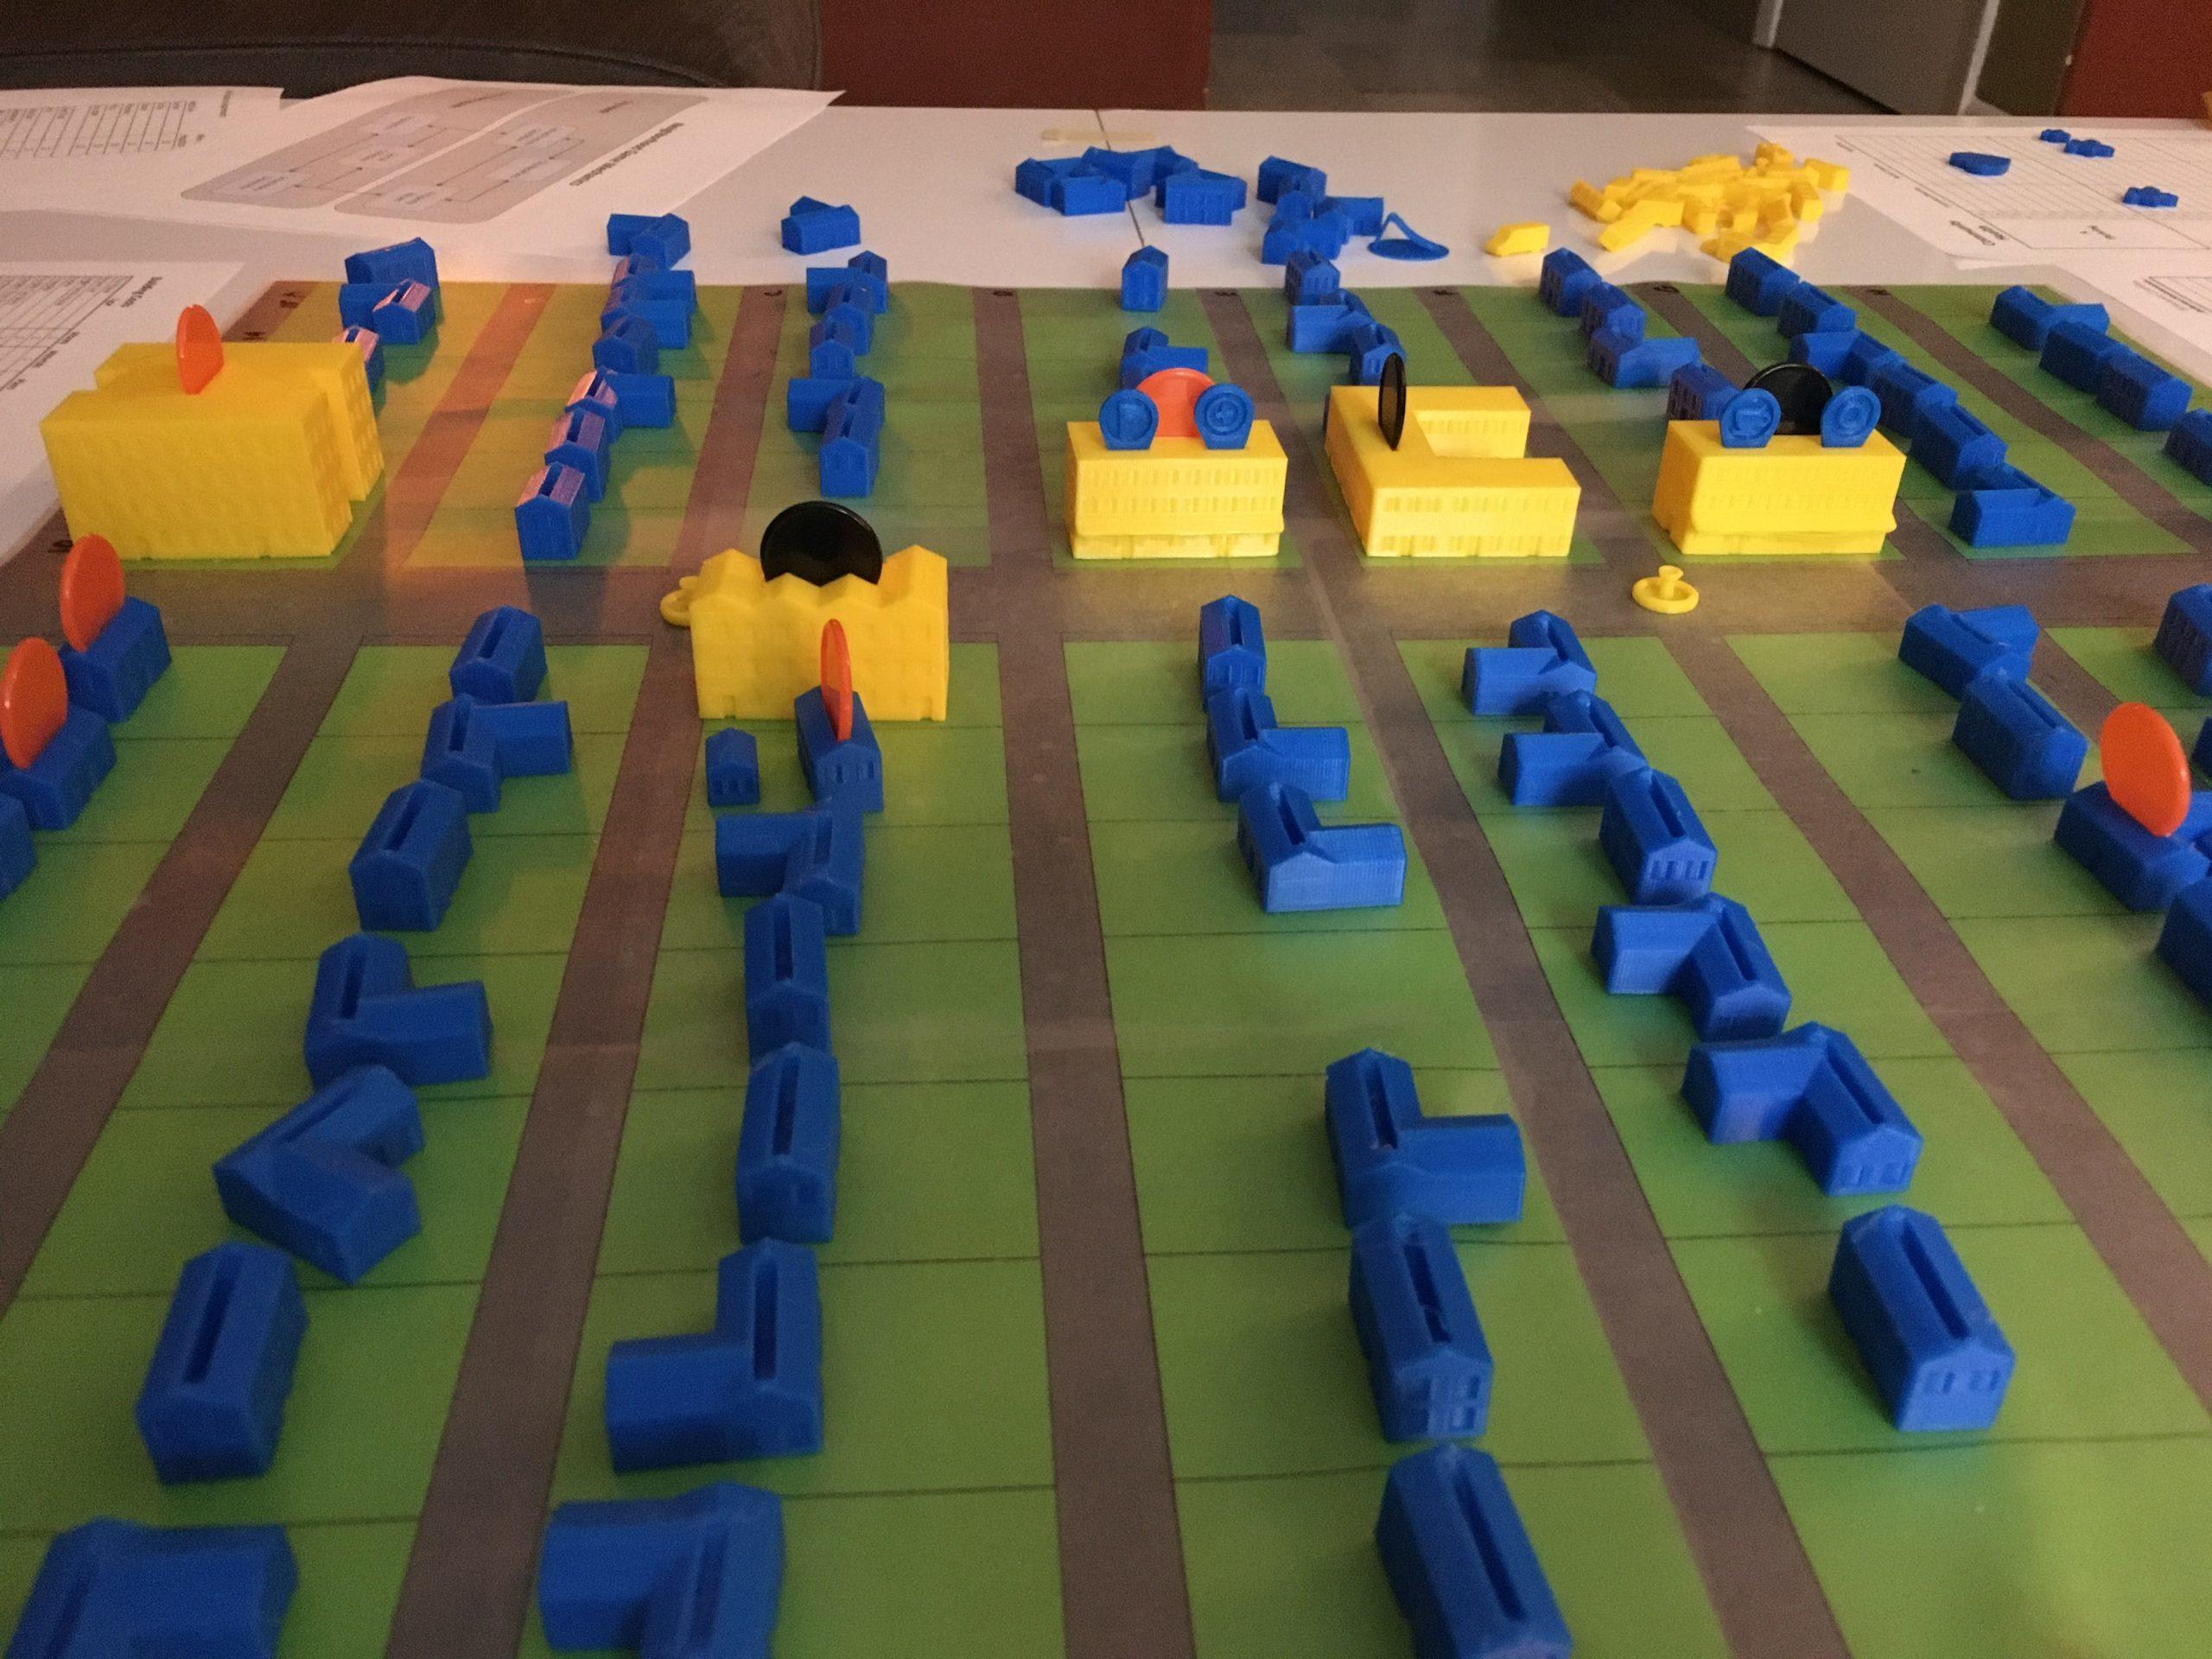 Starting to Playtest the Walkability Game